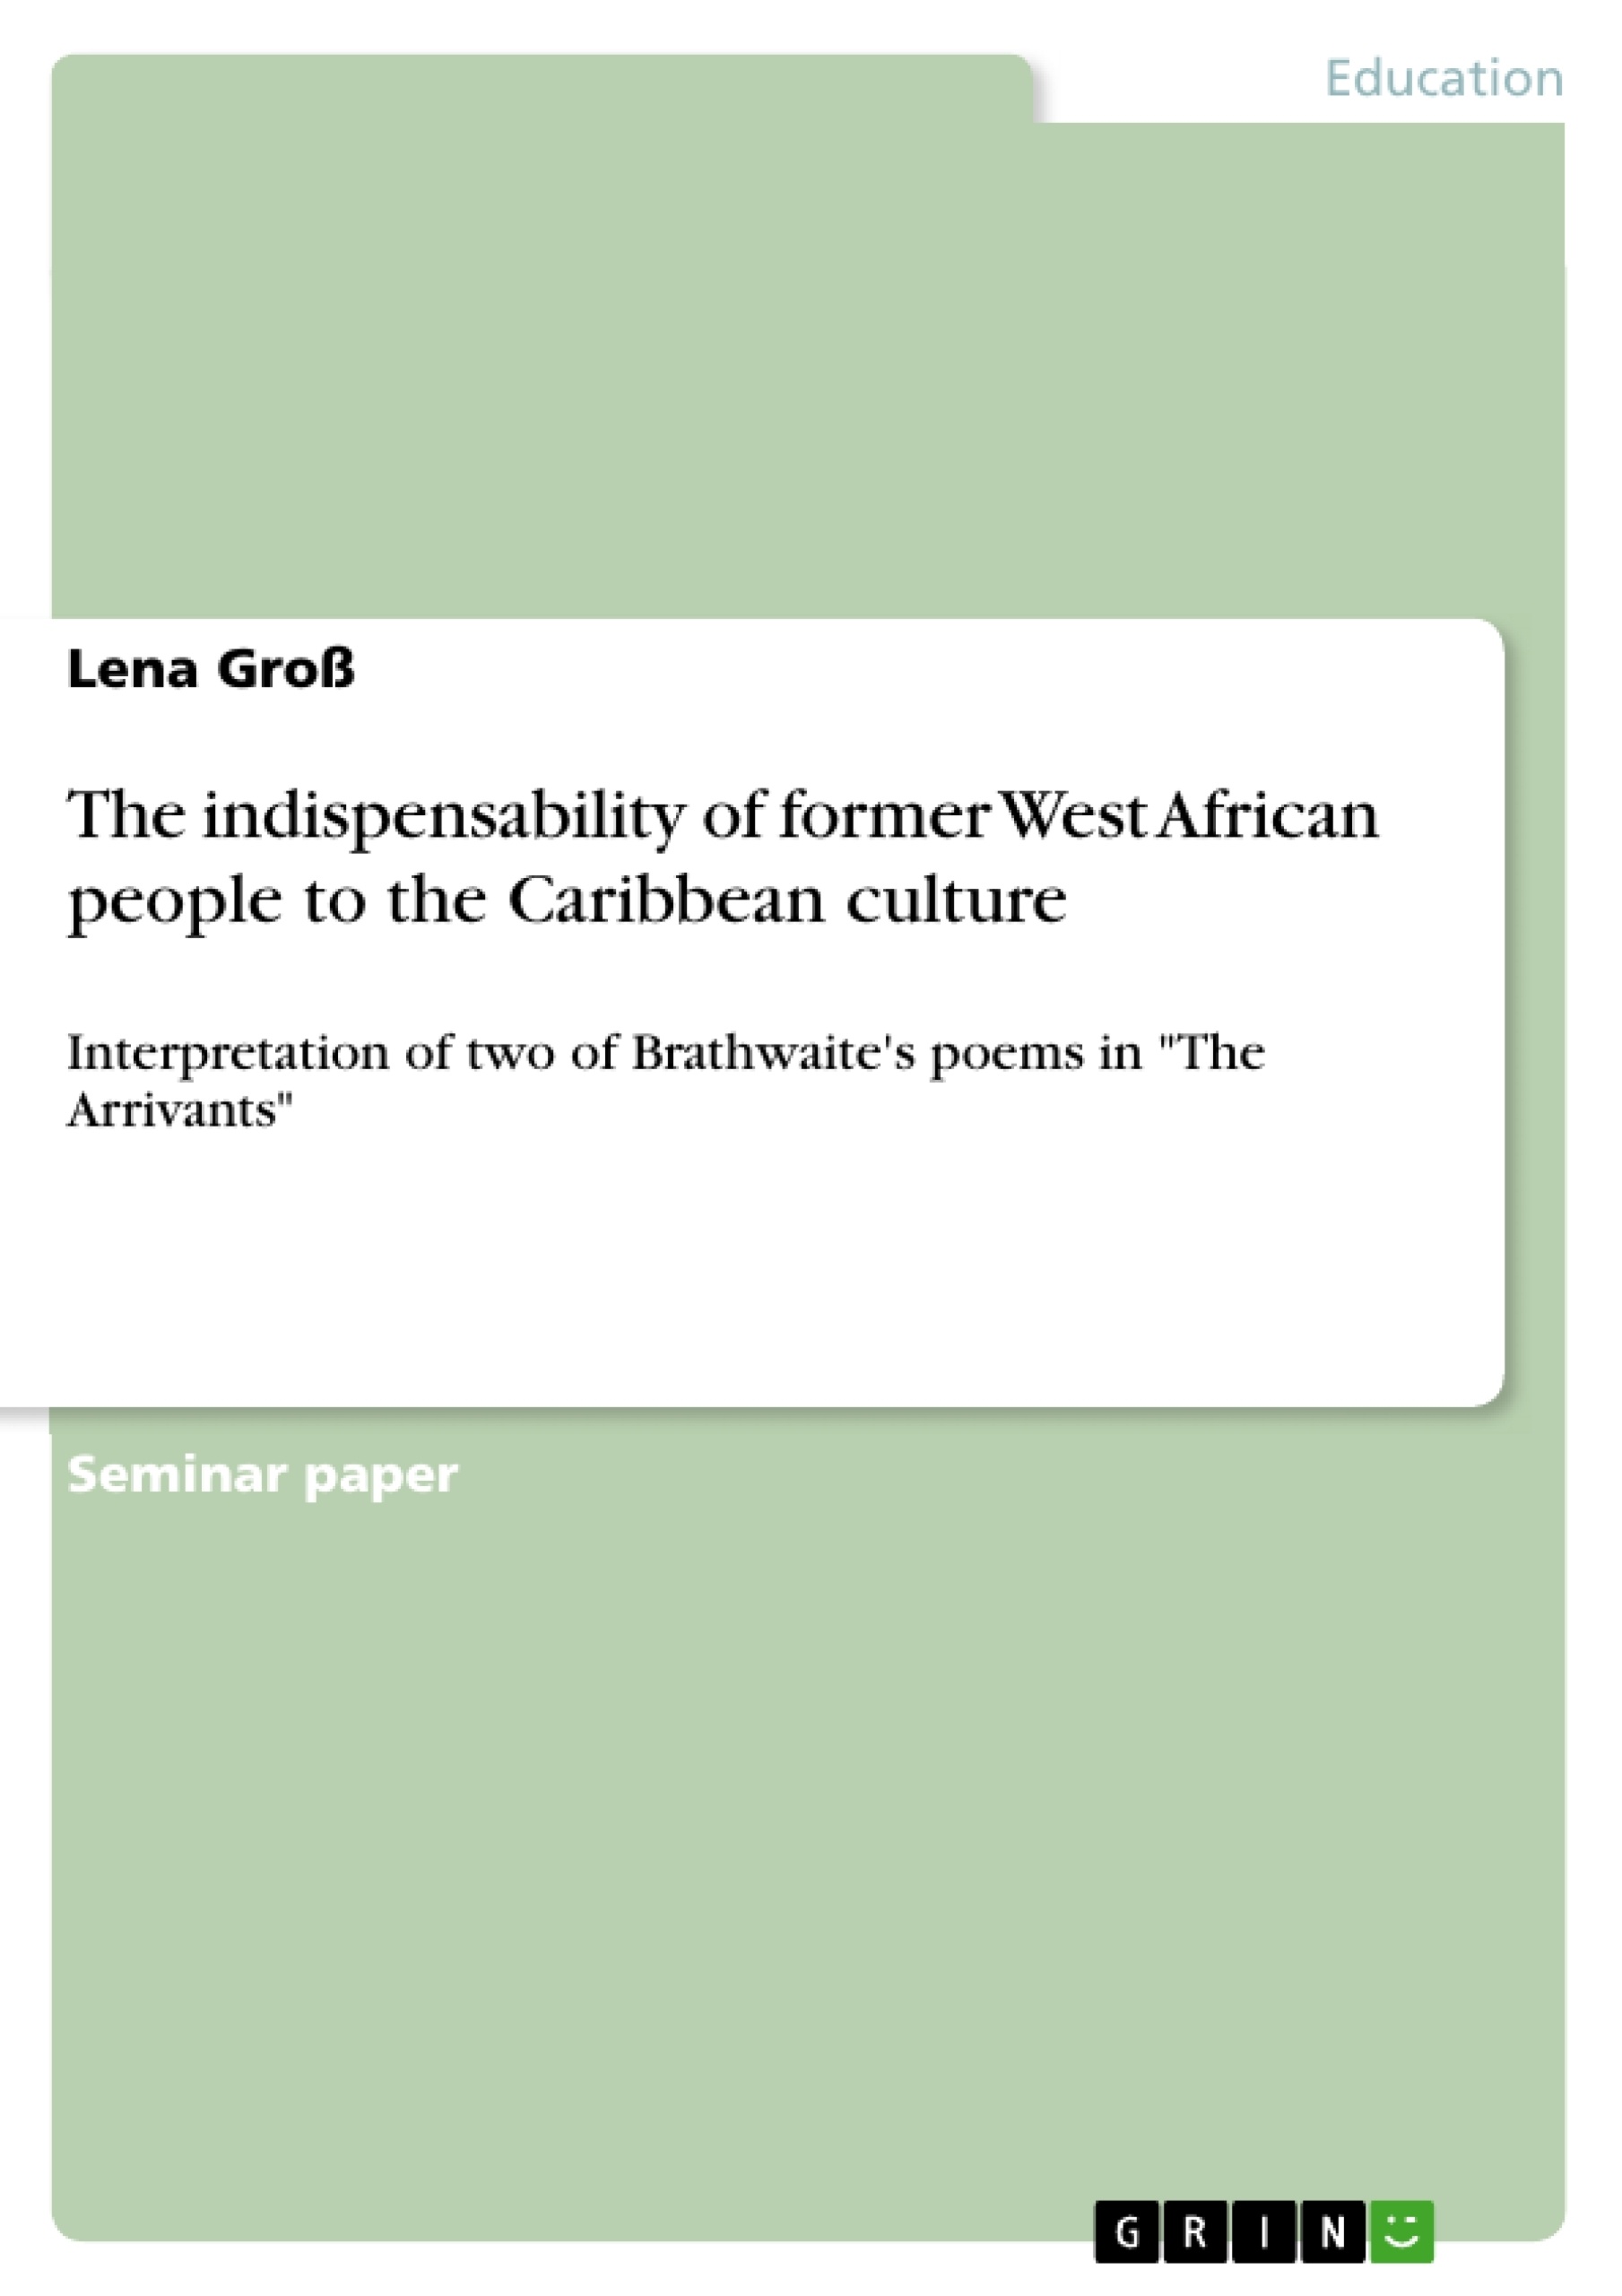 Titel: The indispensability of former West African people to the Caribbean culture